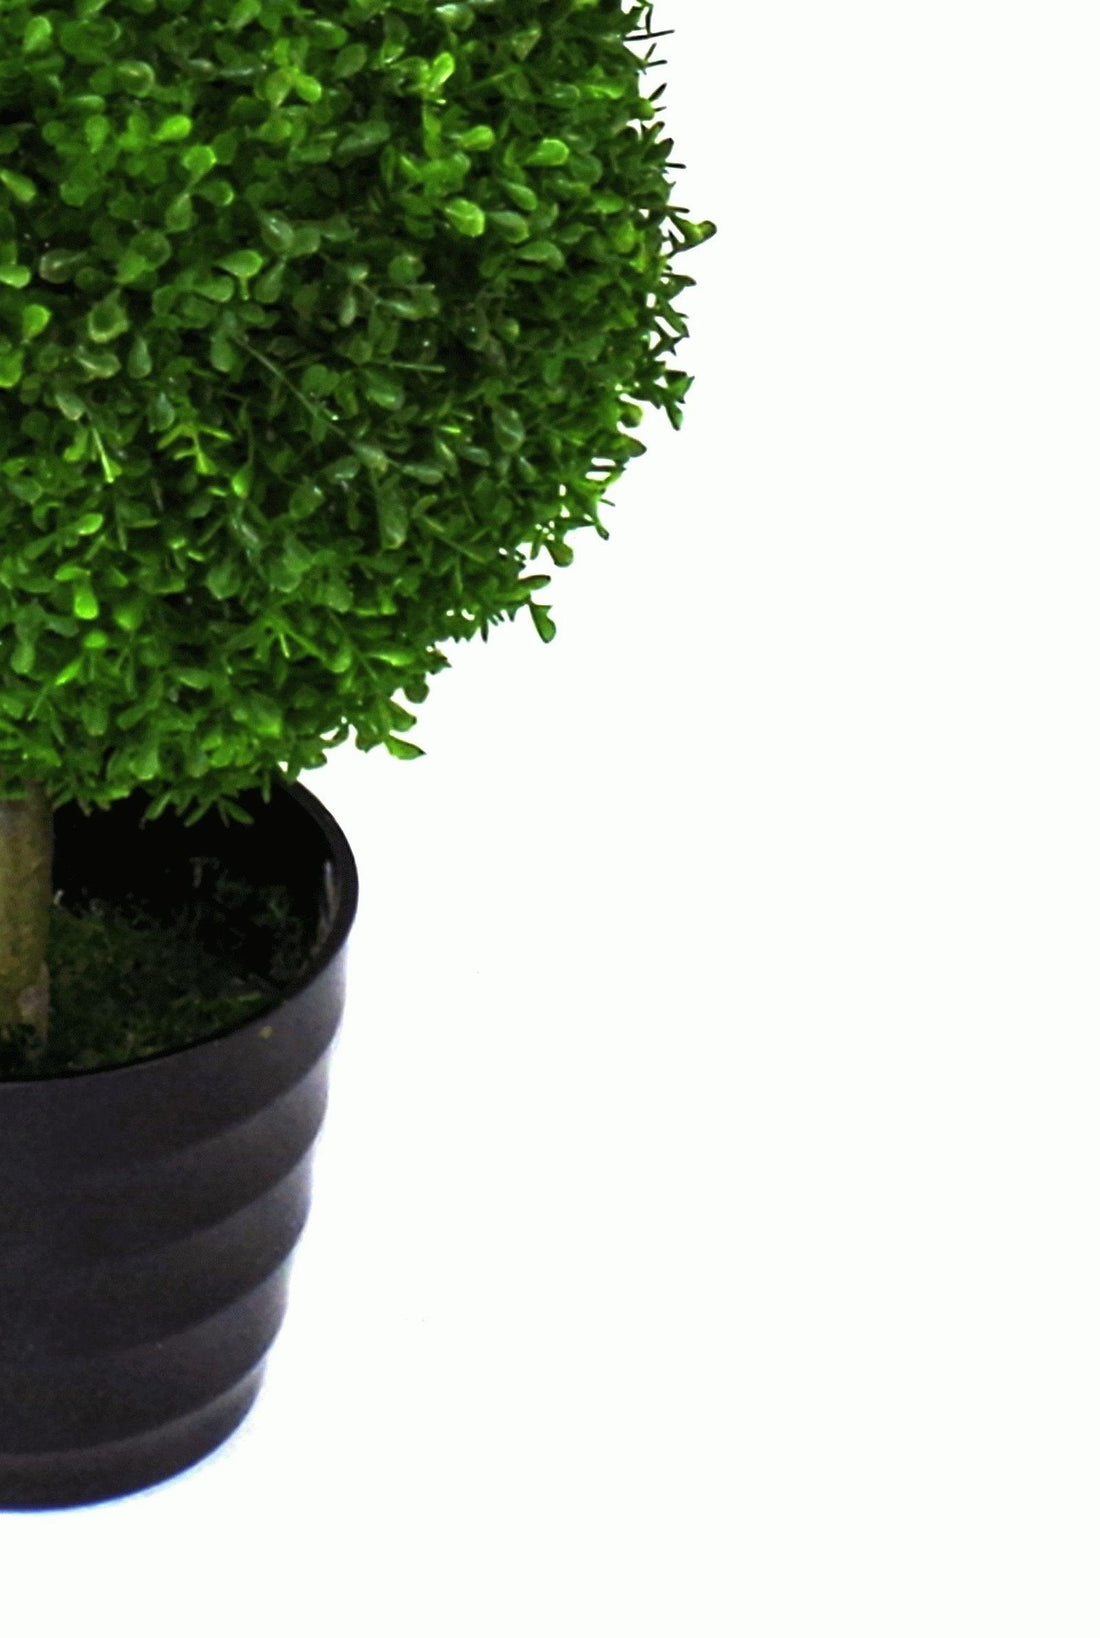 Artificial X-Large 120cm Grass Topiary Tree - £196.99 - Artificial Plants 